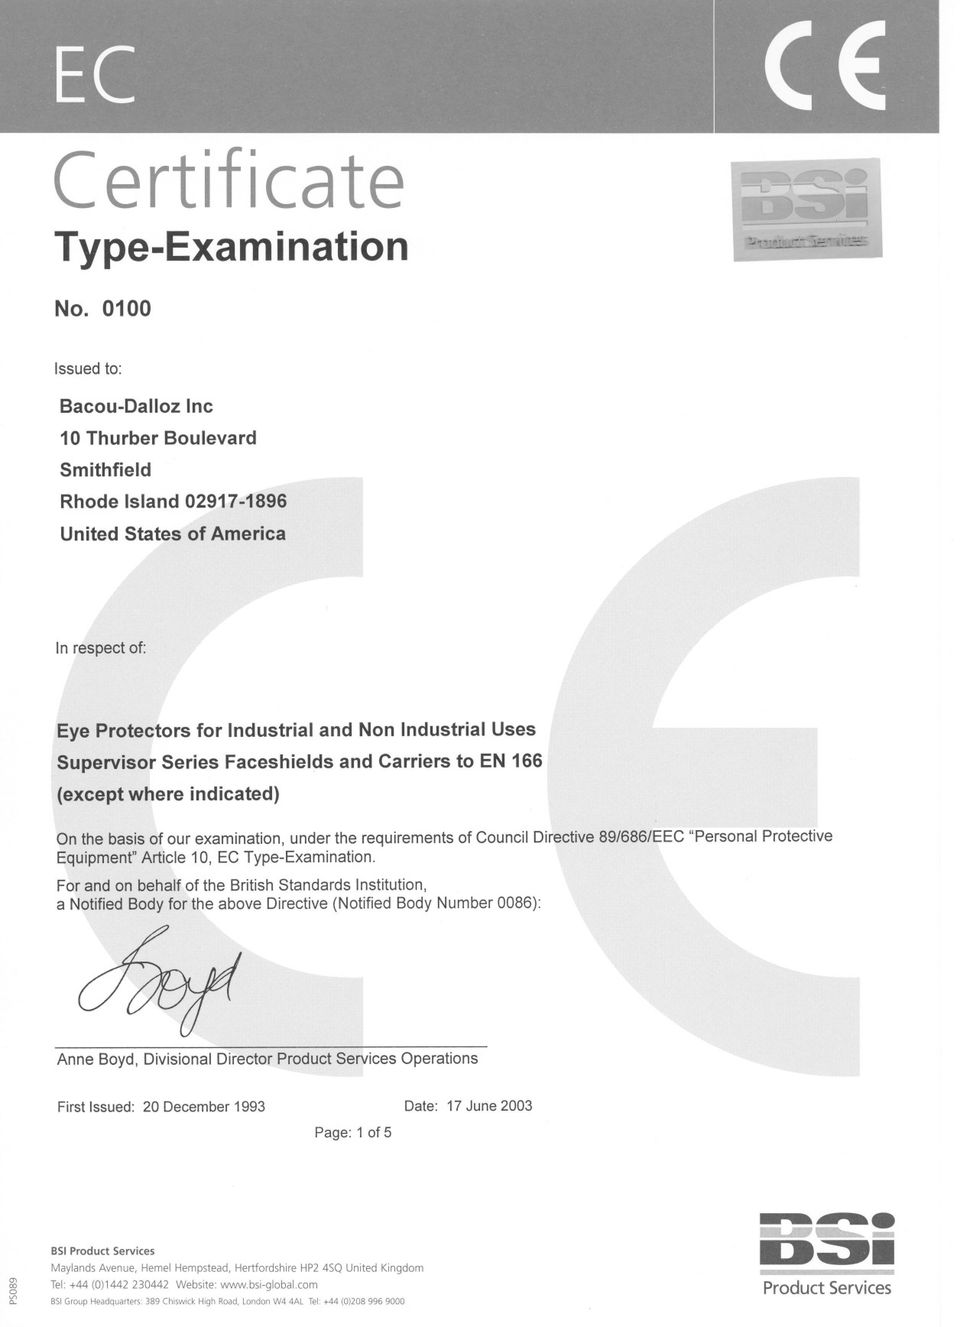 requirements of Council Directive89/686/EEC "Personal Protective Equipment"Article 10, EC Type-Examination.